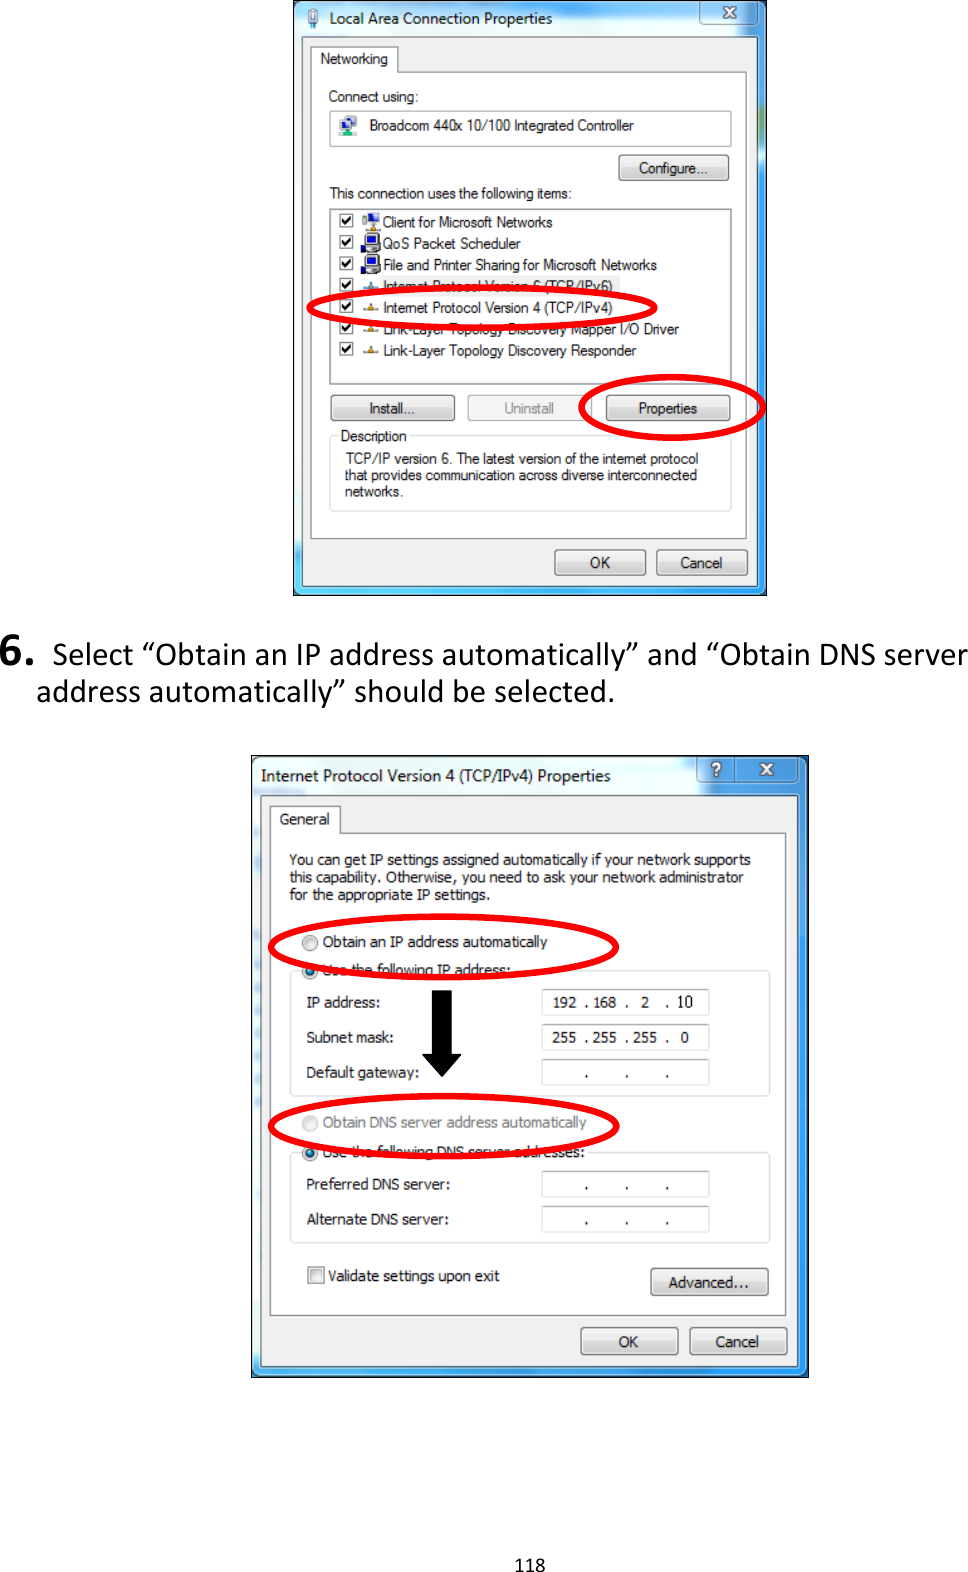 118    6.   Select “Obtain an IP address automatically” and “Obtain DNS server address automatically” should be selected.    